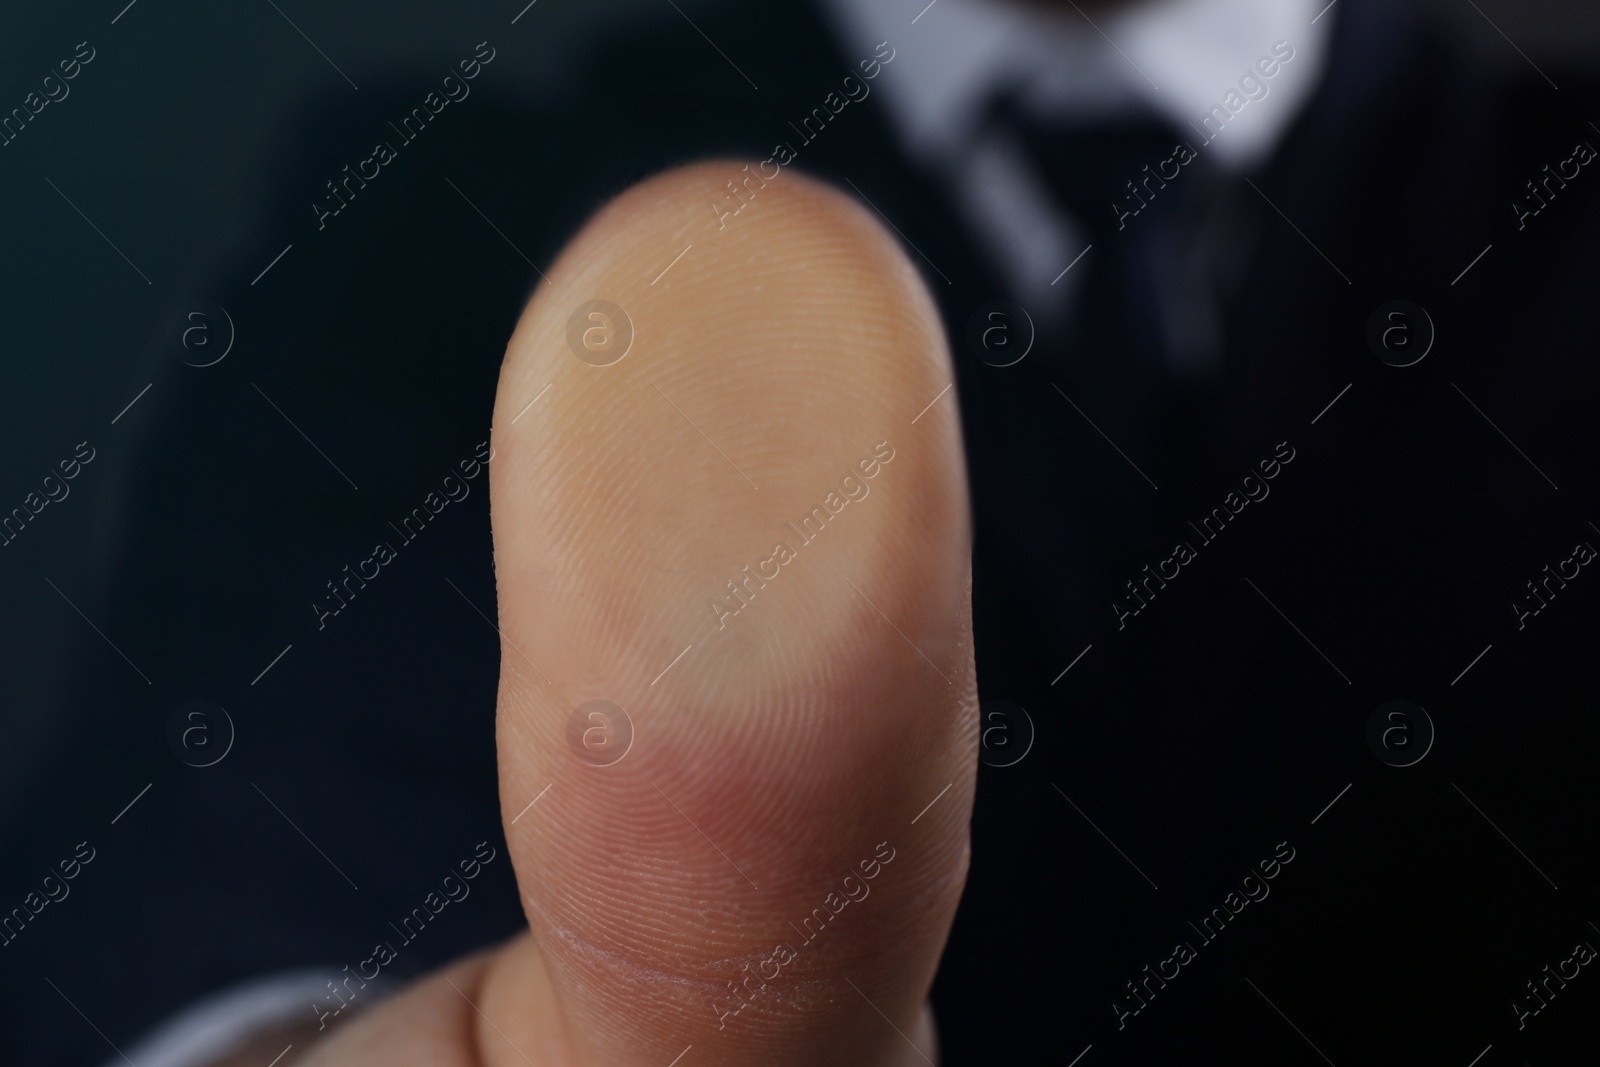 Photo of Businessman pressing control glass of biometric fingerprint scanner, closeup. Space for text